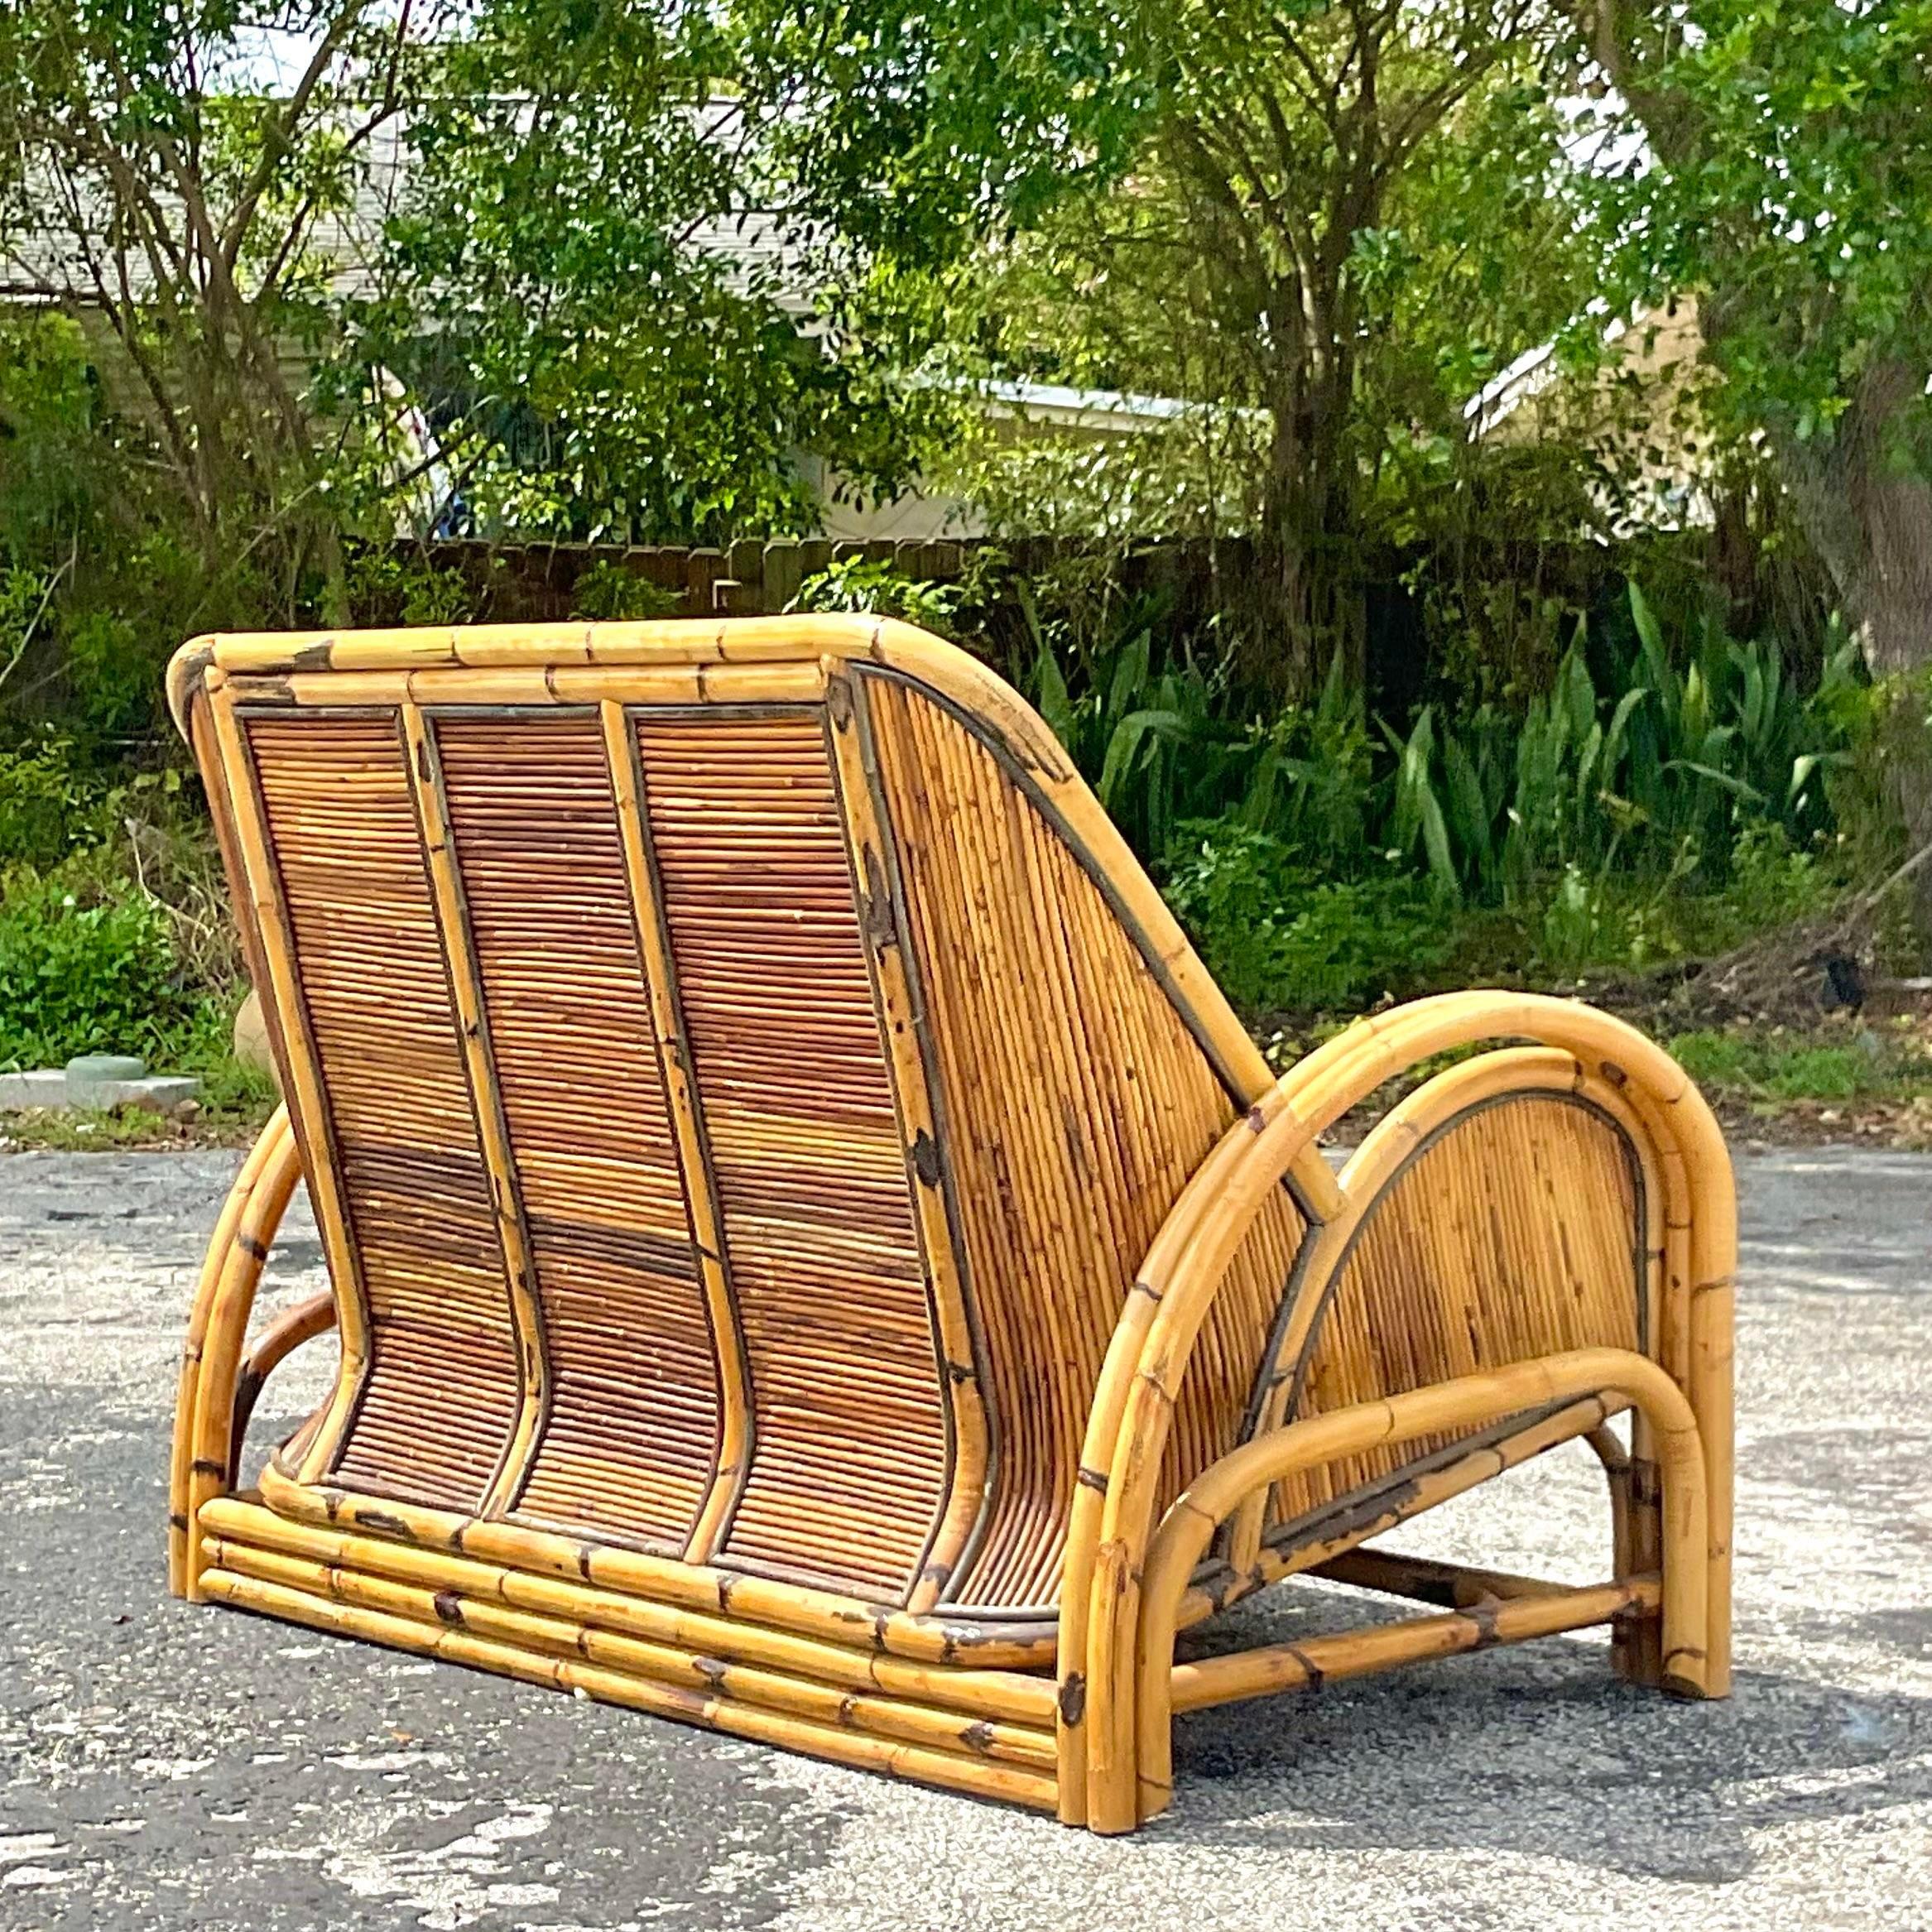 A striking vintage Coastal loveseat. A chic 1950s design made in a tortoise shell pencil reed. Coordinating chair also available on my page. See pics. Acquired from a Palm Beach estate.